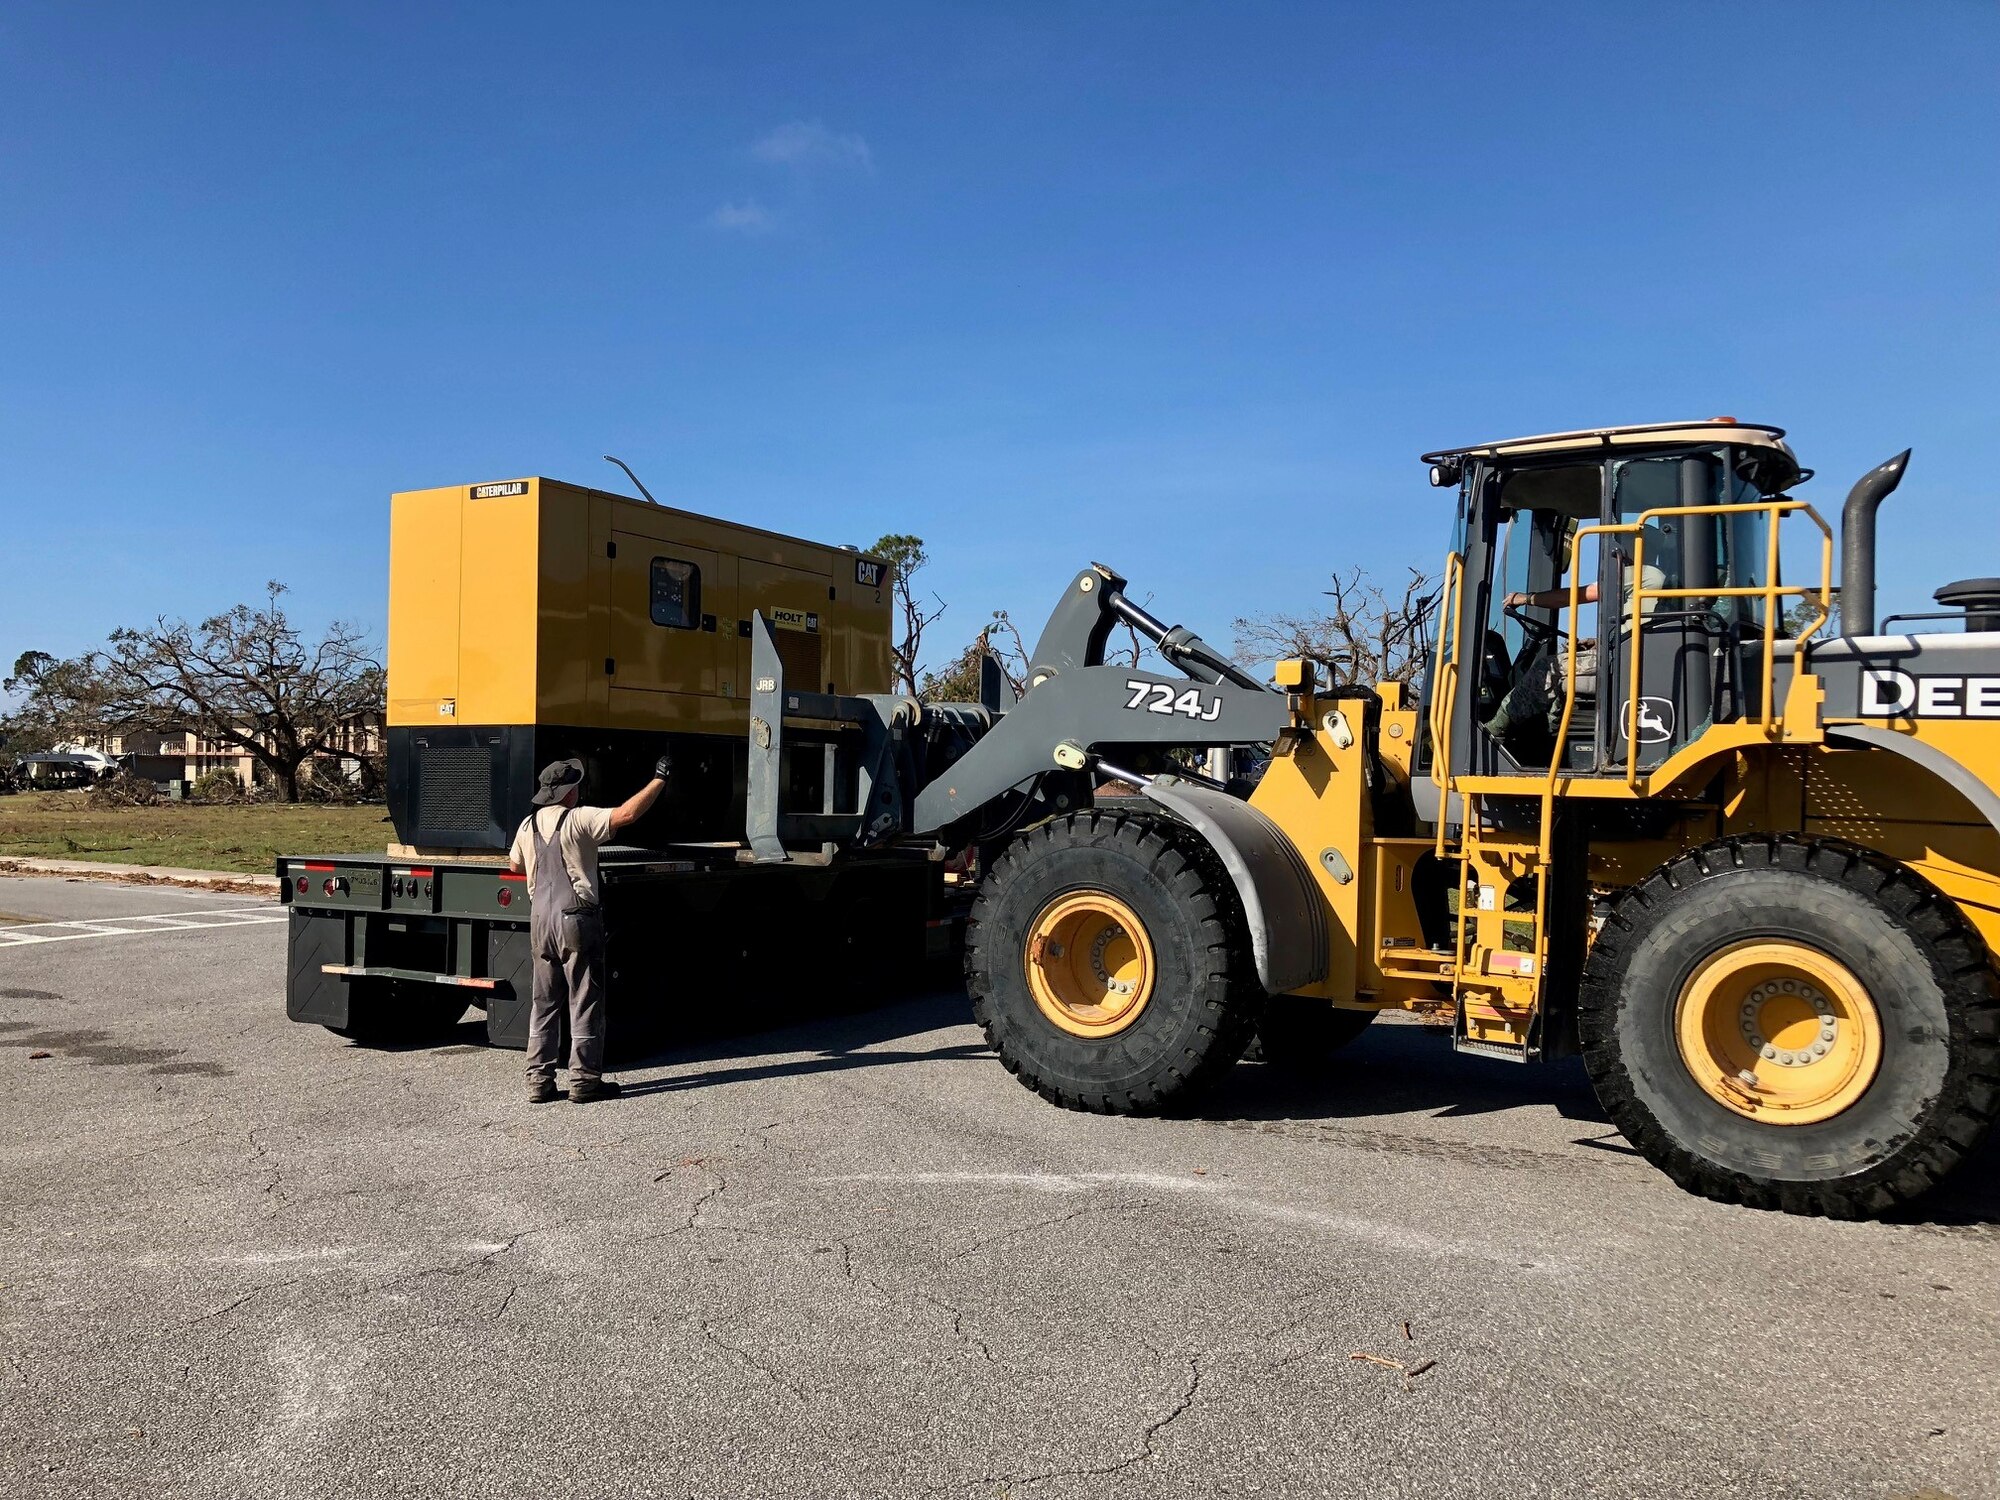 Less than 48 hours after Hurricane Michael devastated Tyndall AFB, several members of CEMIRT were on-site delivering generators to return power to the base.